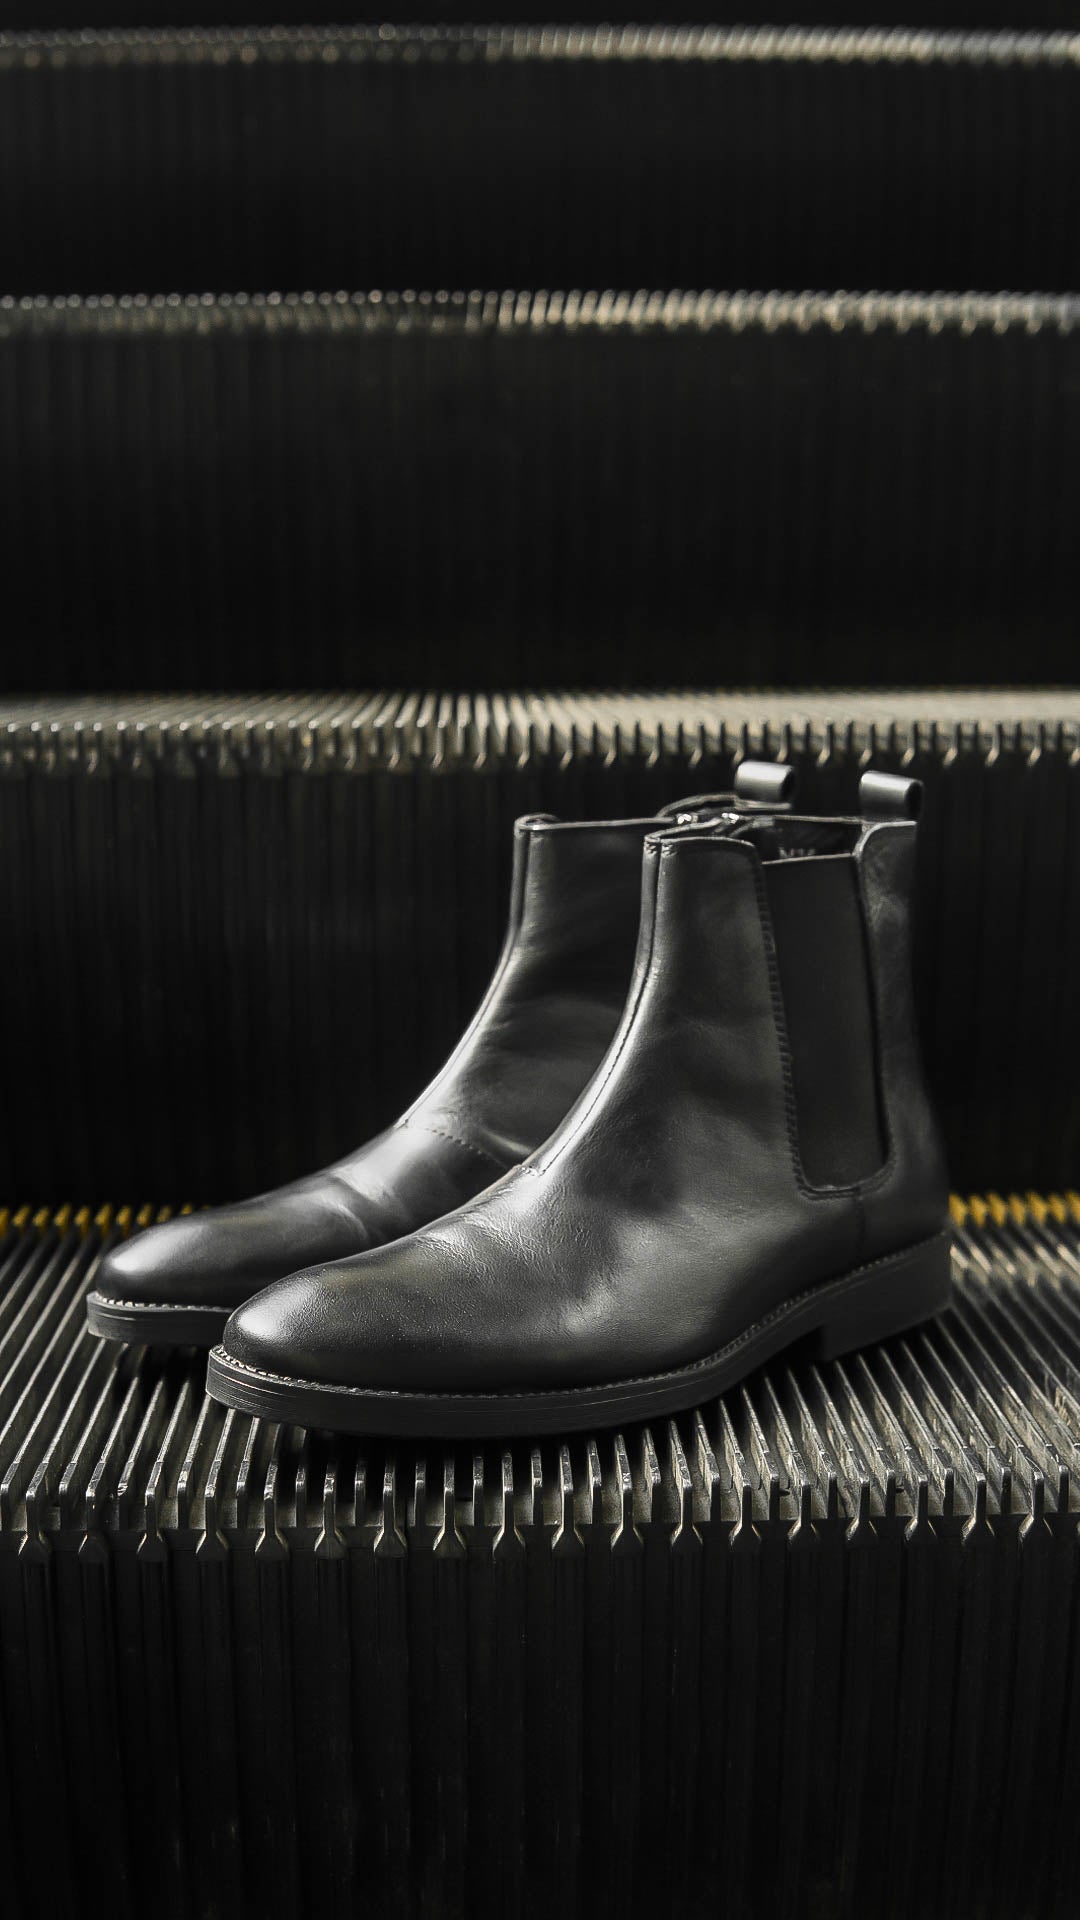 Chelsea Boots With Zipper - Solid Black Leather (Crepe Sole) - Zeve Shoes